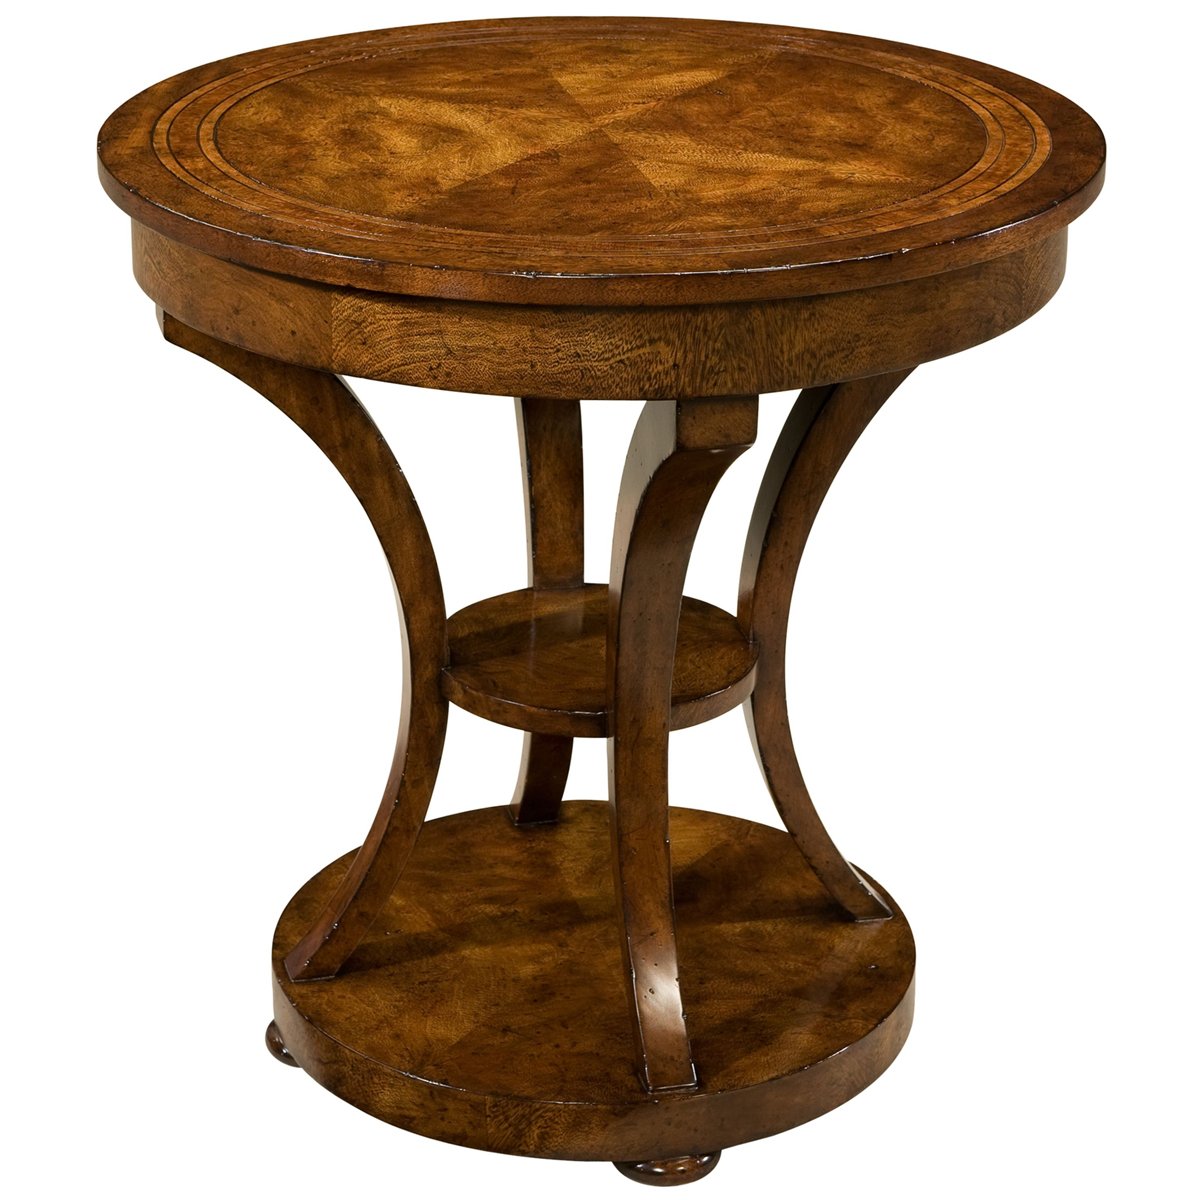 Theodore Alexander Brooksby Brooksby'S Occasion Accent Table